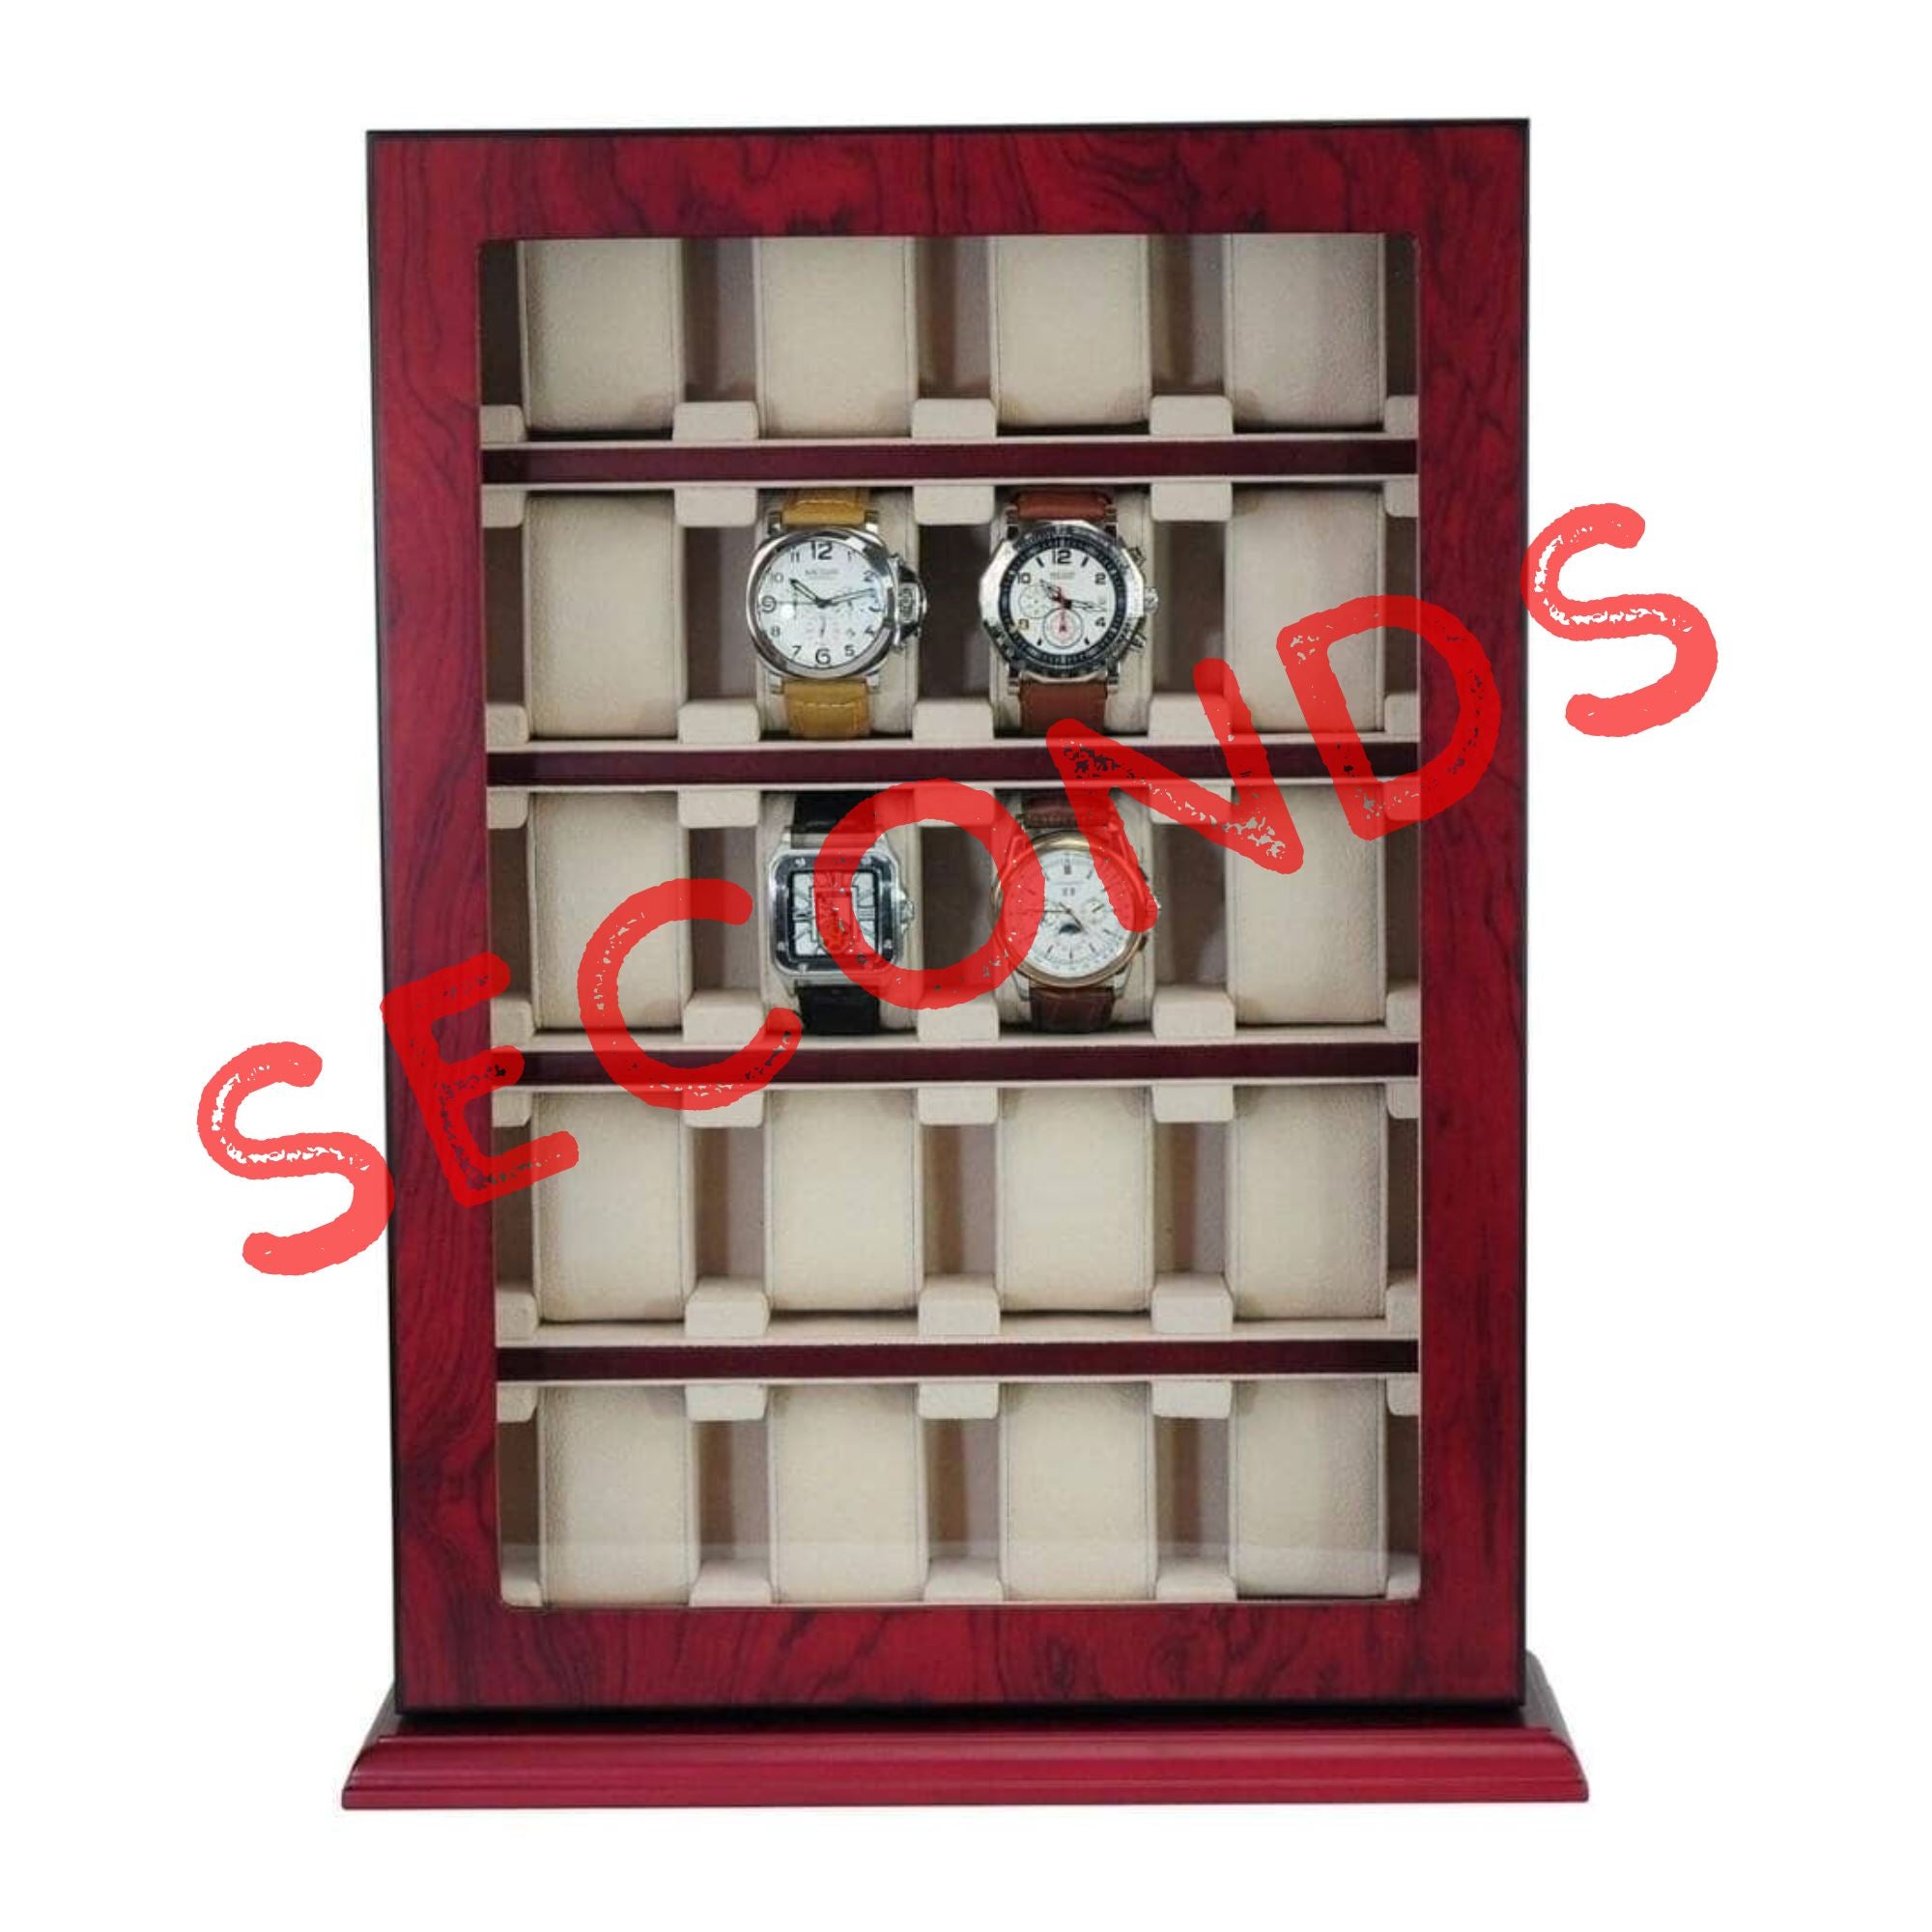 Seconds - Bubinga Wooden Watch Cabinet for 20 Seconds Clinks 